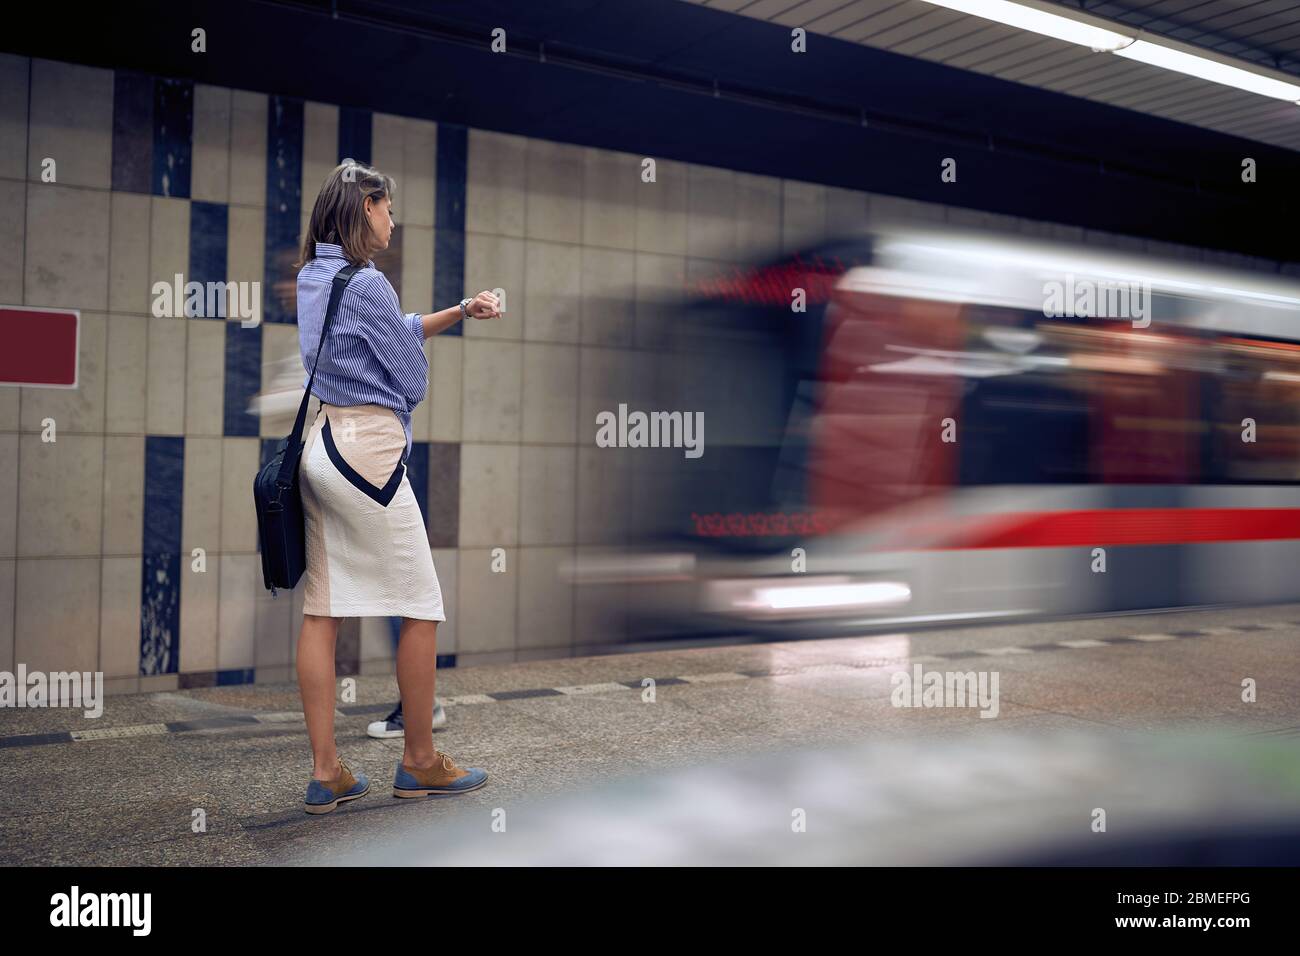 Business woman waiting for metro in subway.Young woman waiting for a train in metro. Stock Photo